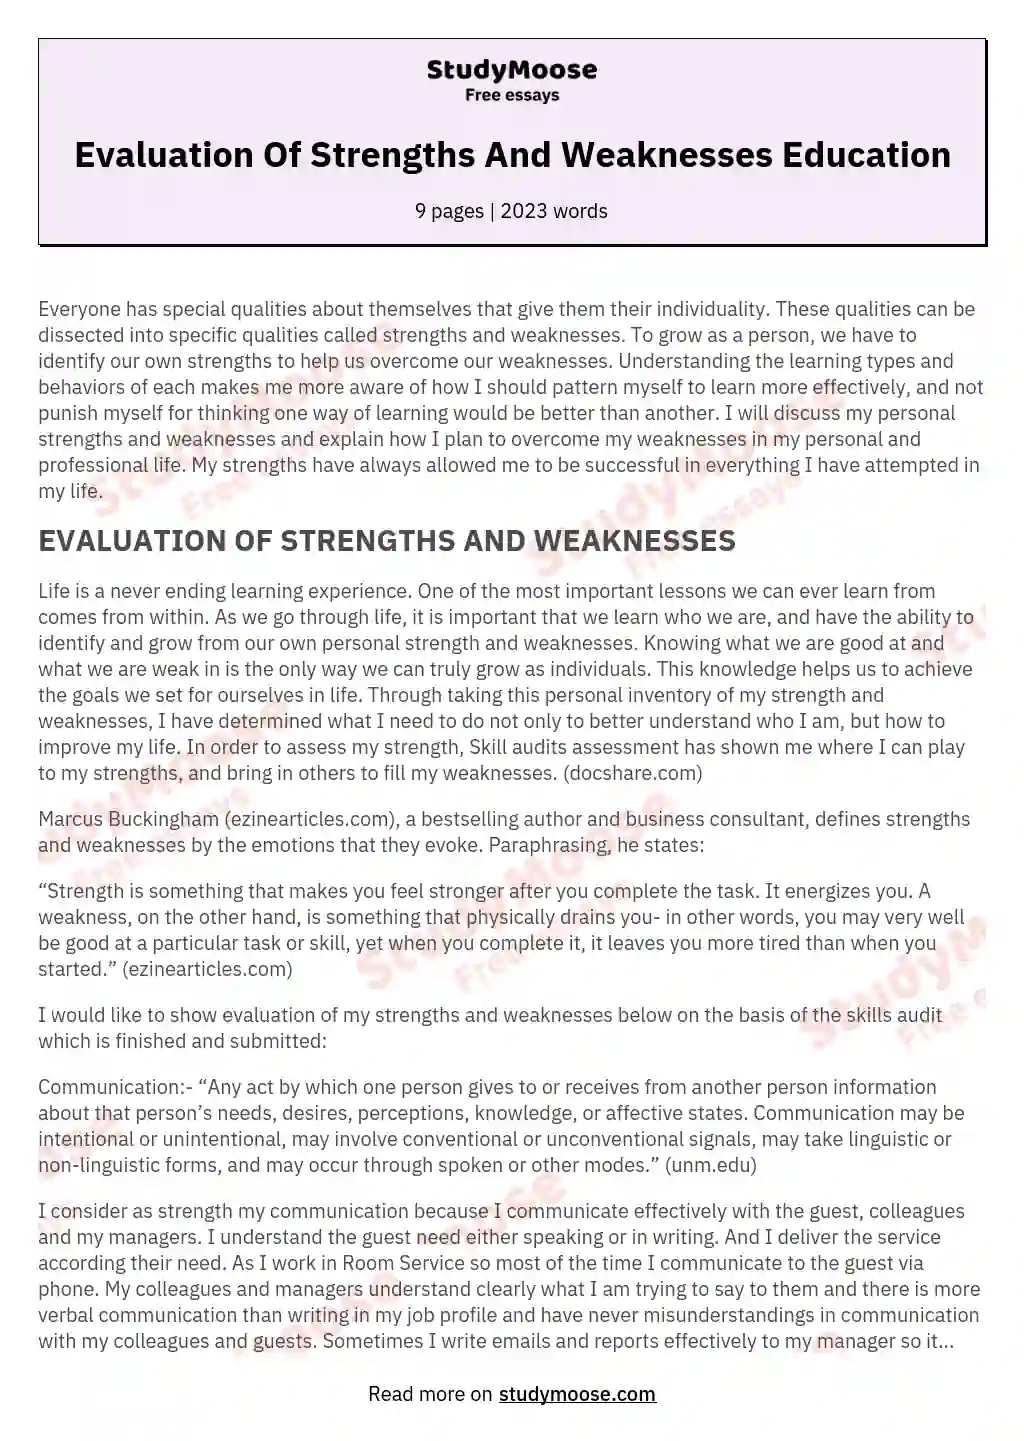 Evaluation Of Strengths And Weaknesses Education essay